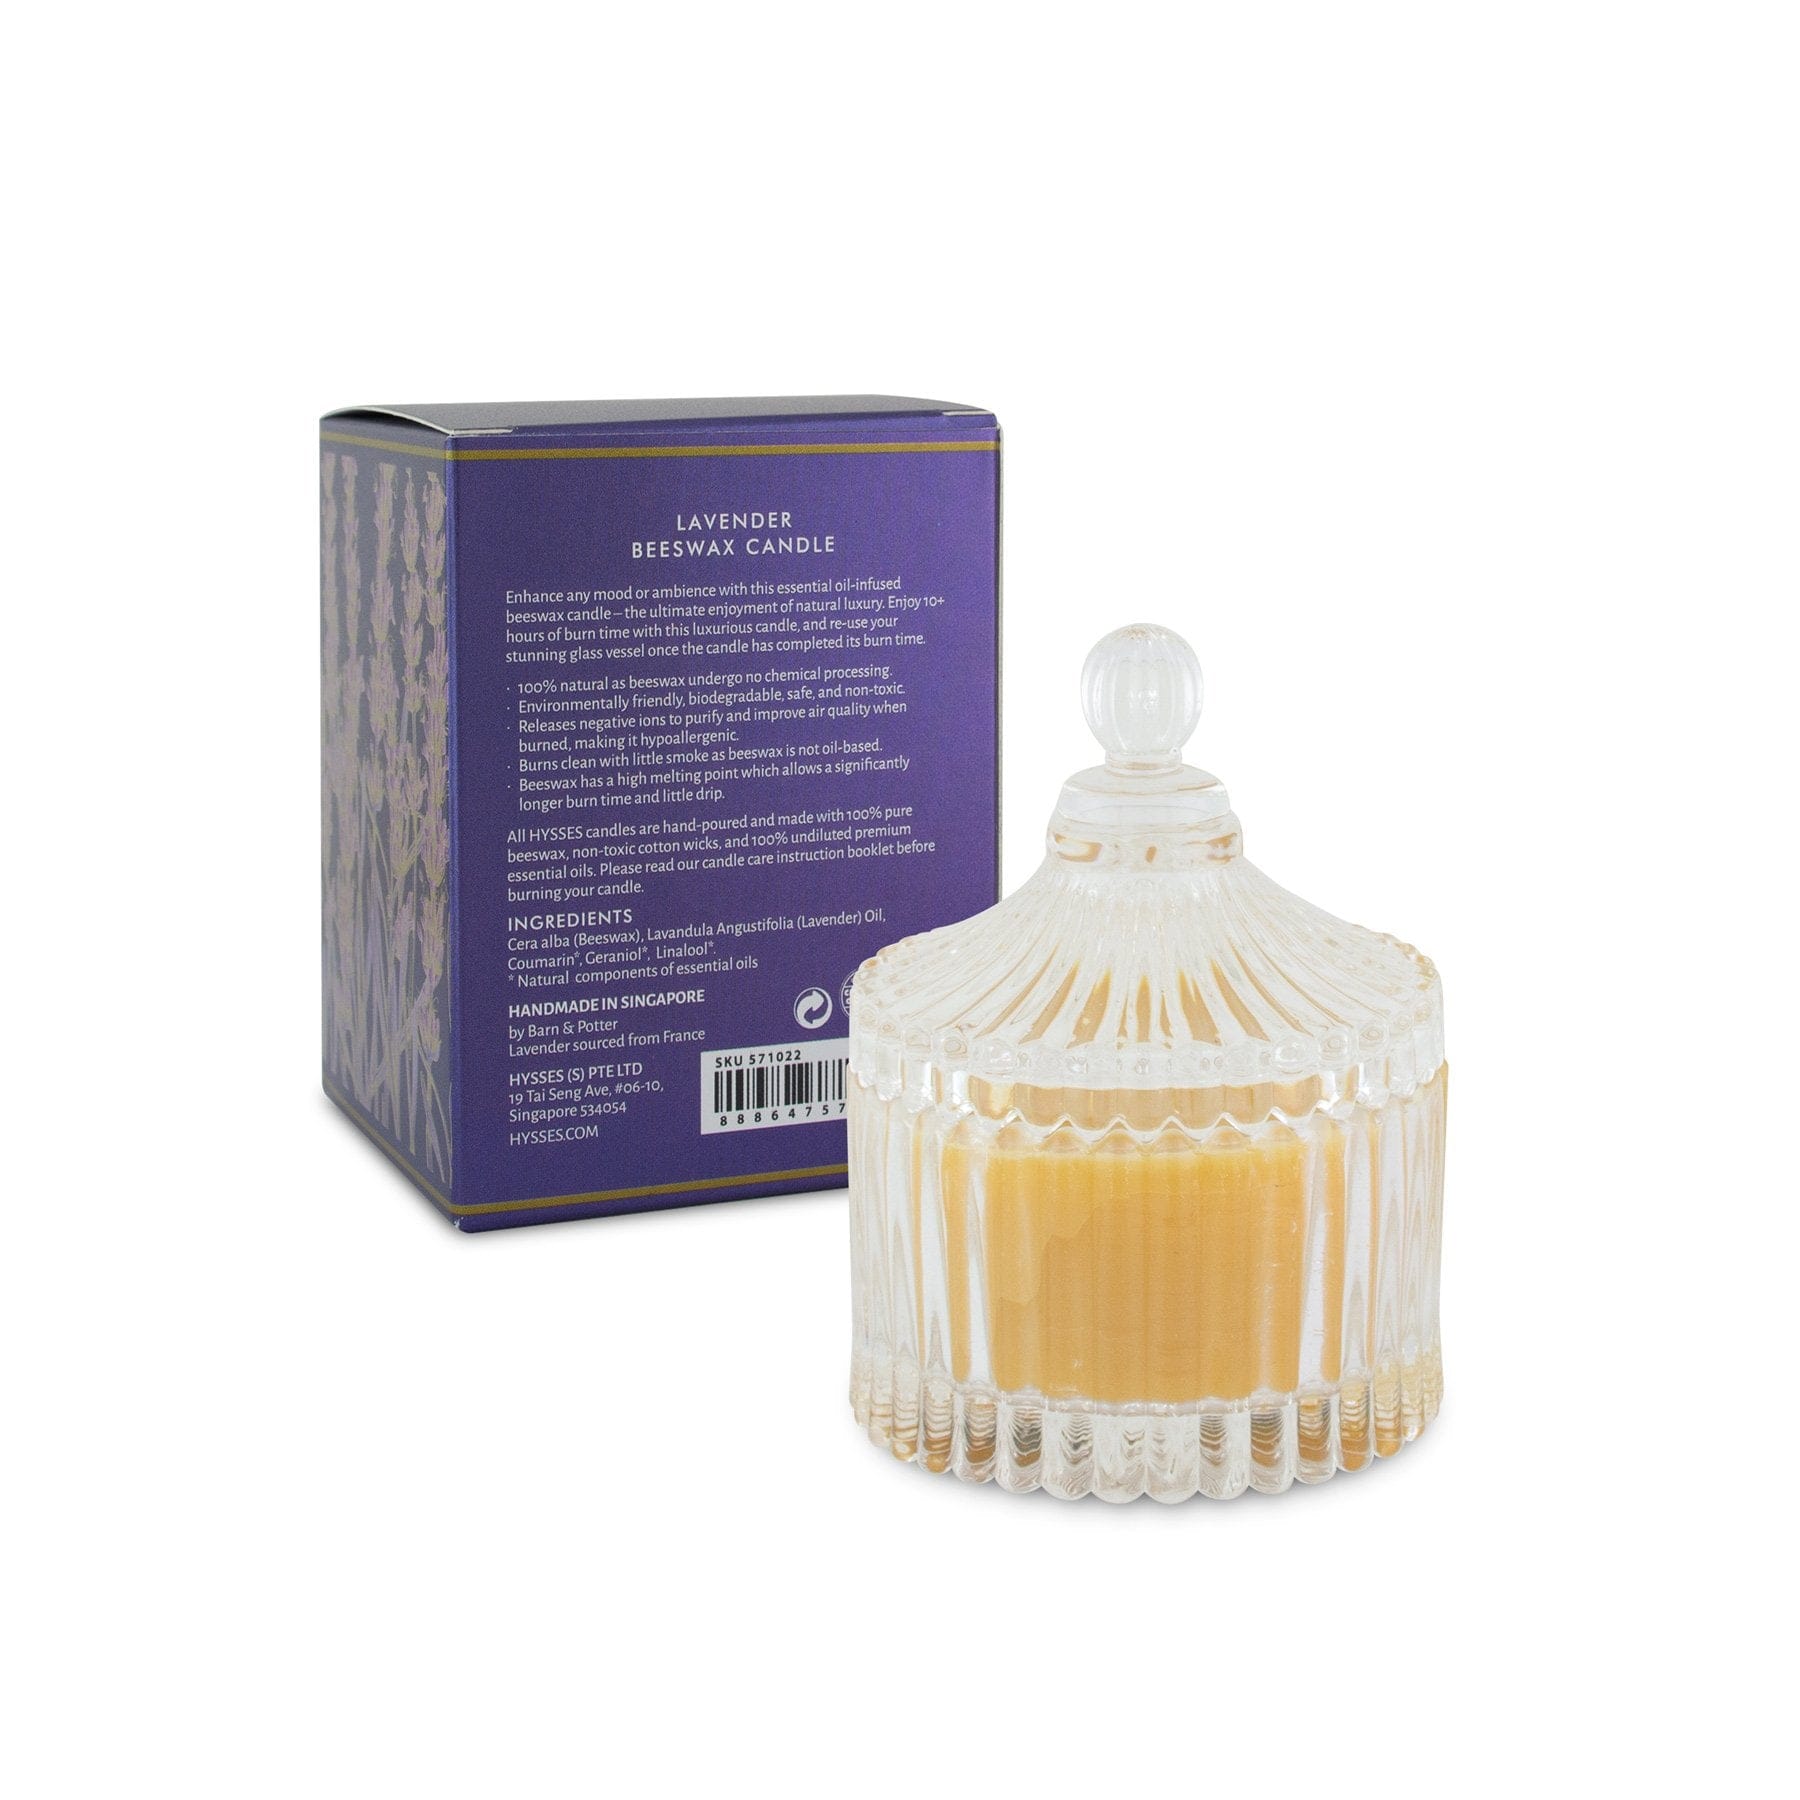 Hysses Home Scents 200g Beeswax Candle Lavender 200g